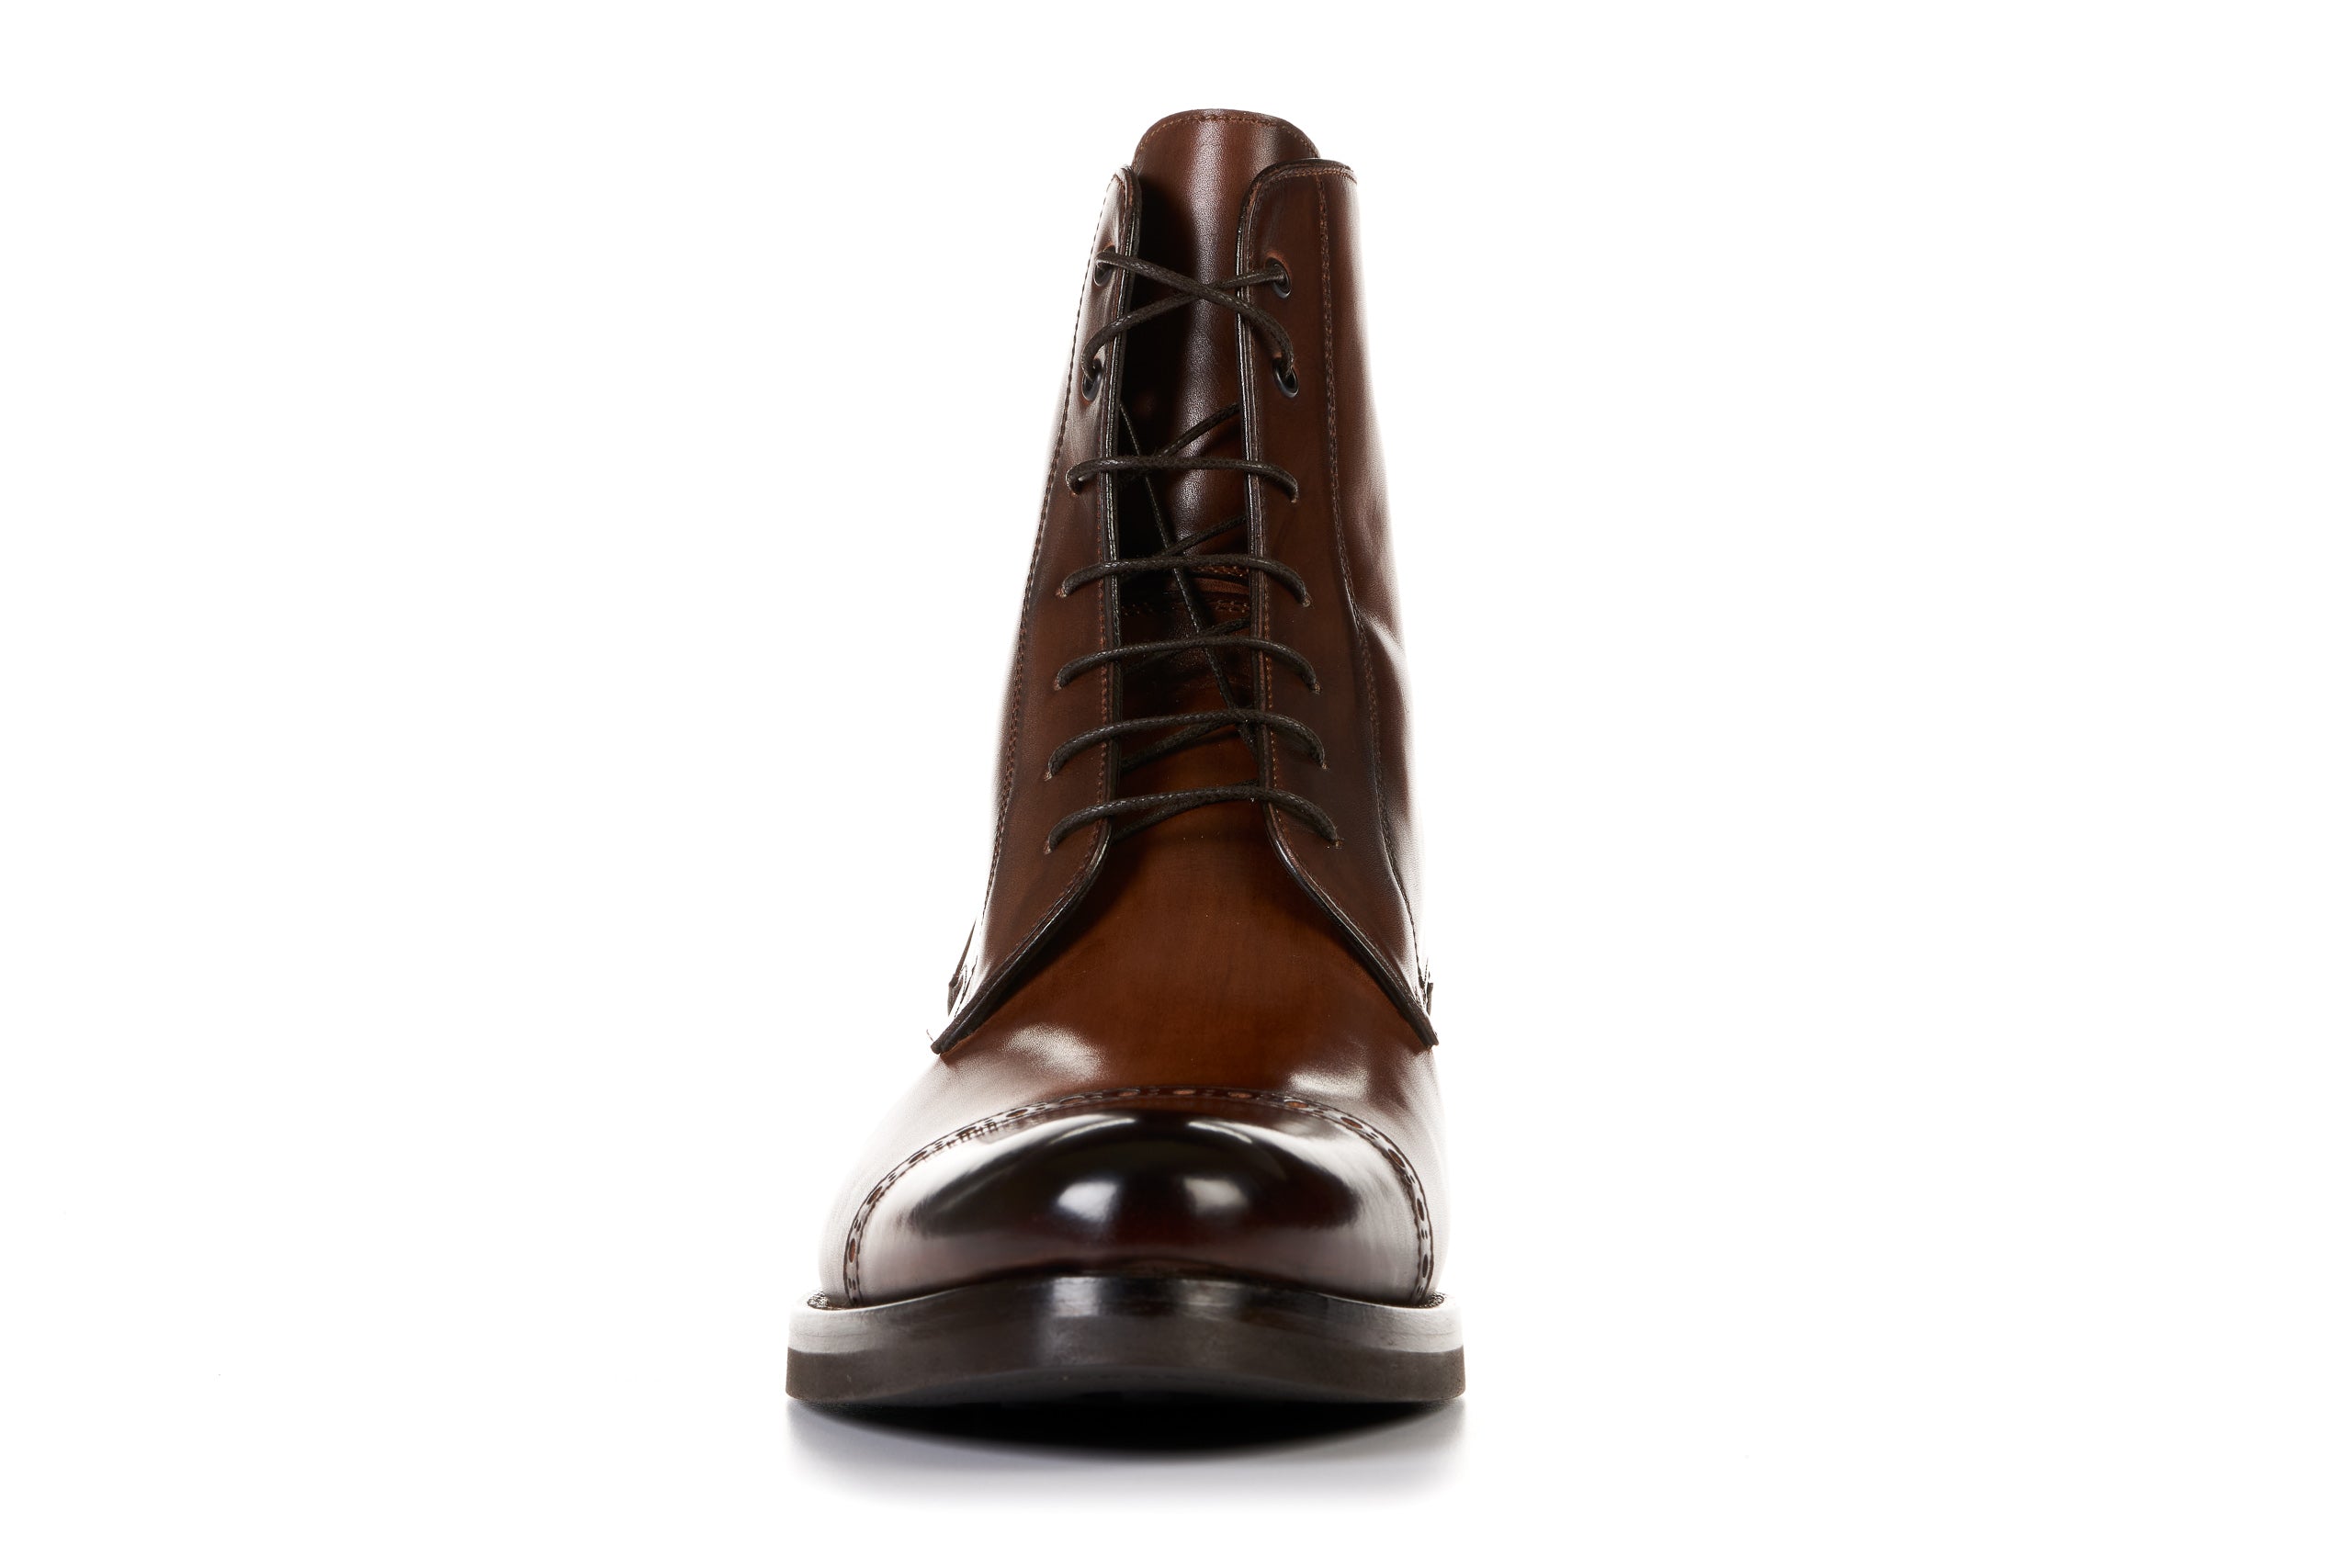 The Presley Lace-Up Boot - Brown - Rubber Sole